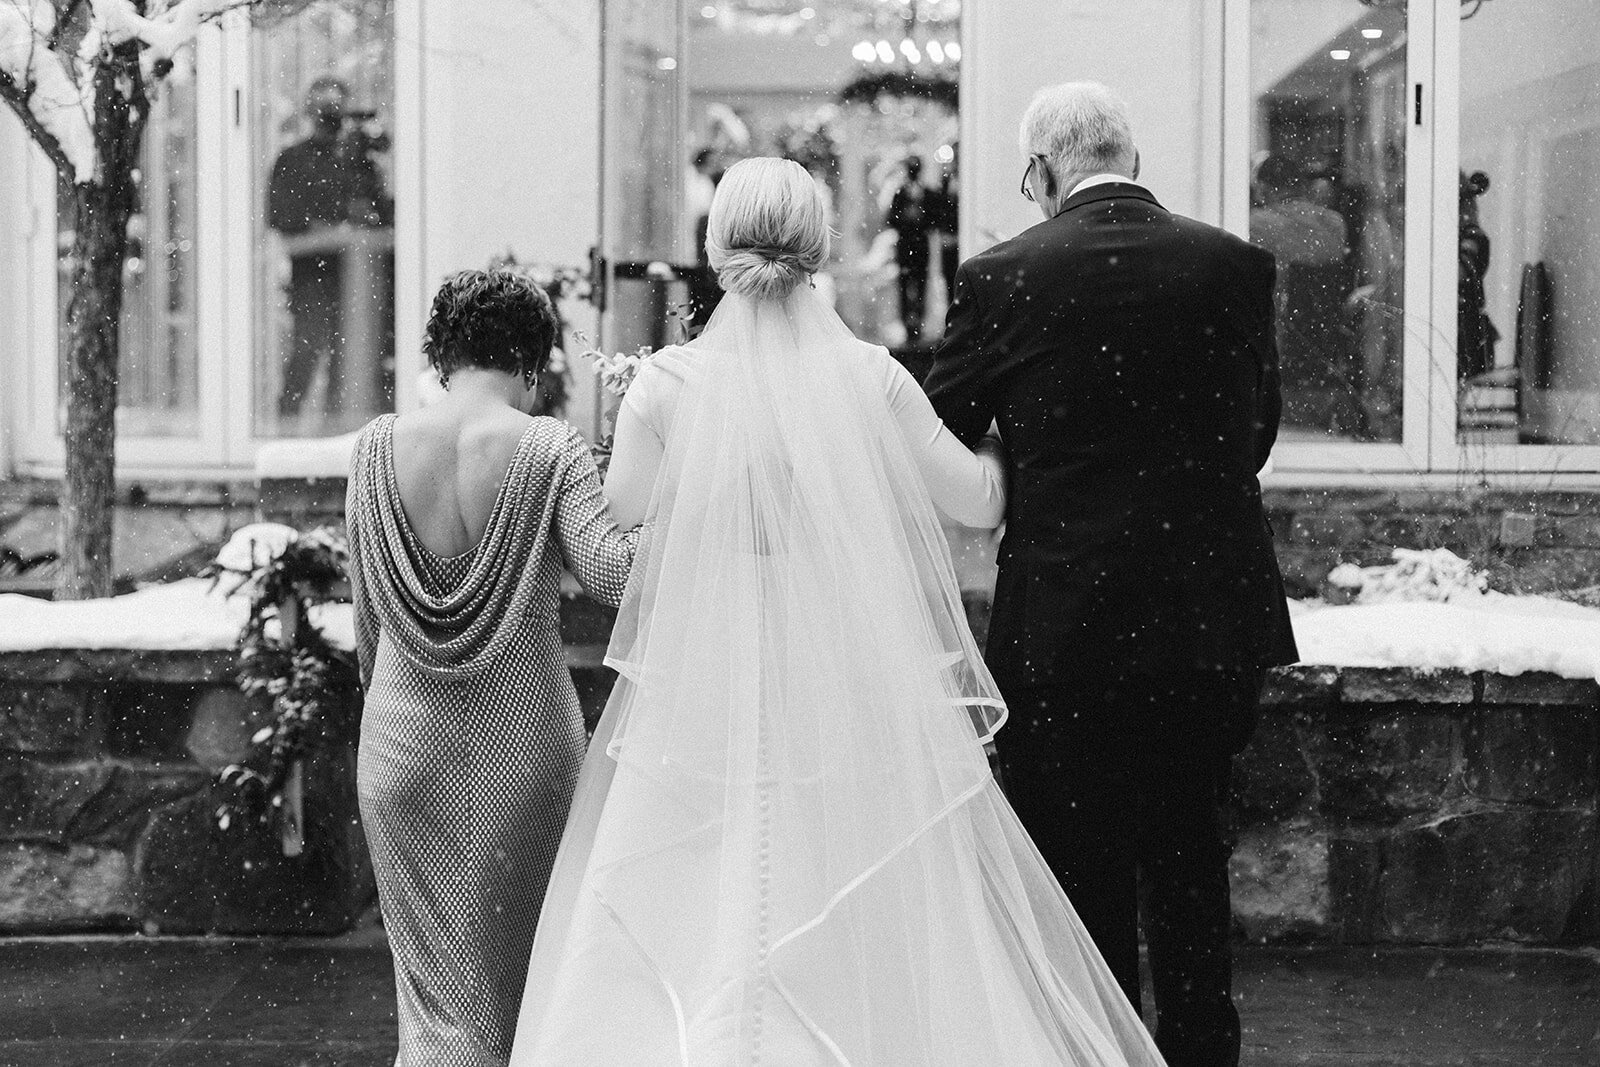 Parents walk bride down the aisle while its snowing in black and white